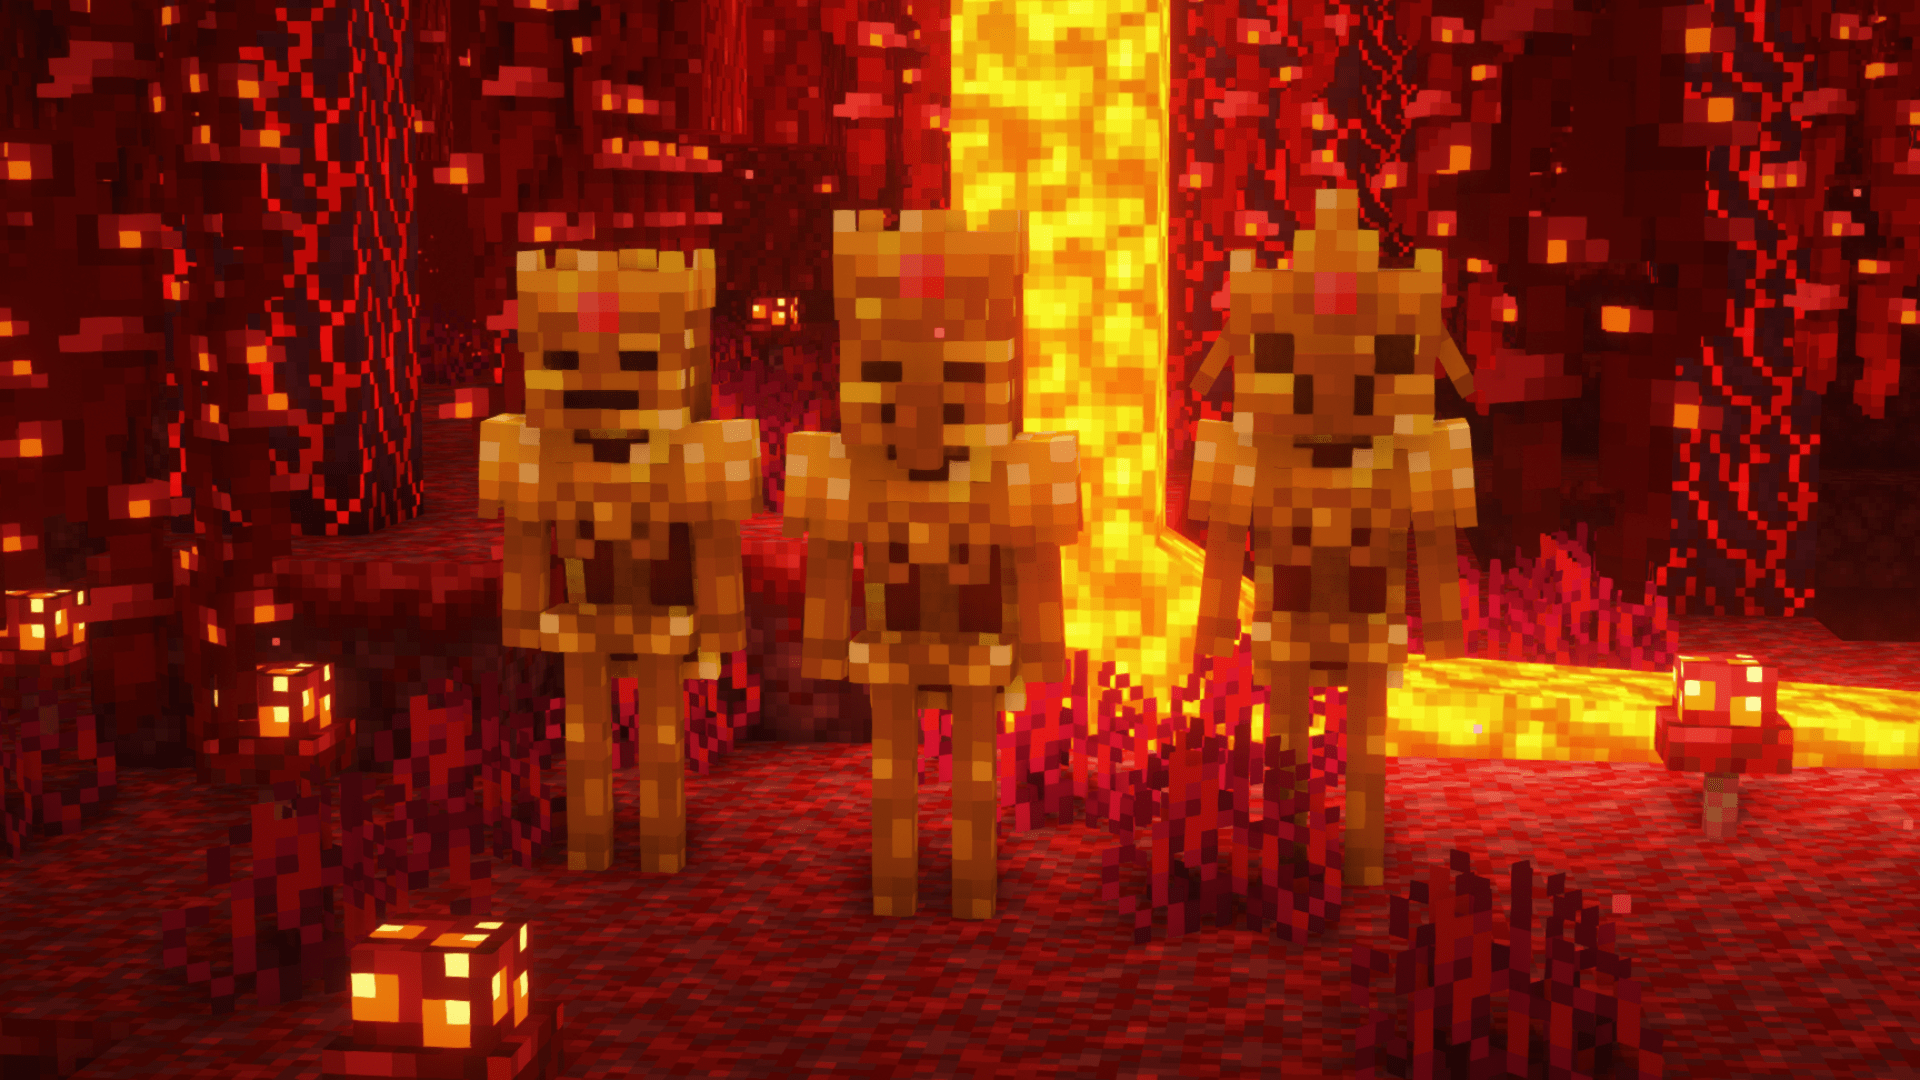 wither golden min